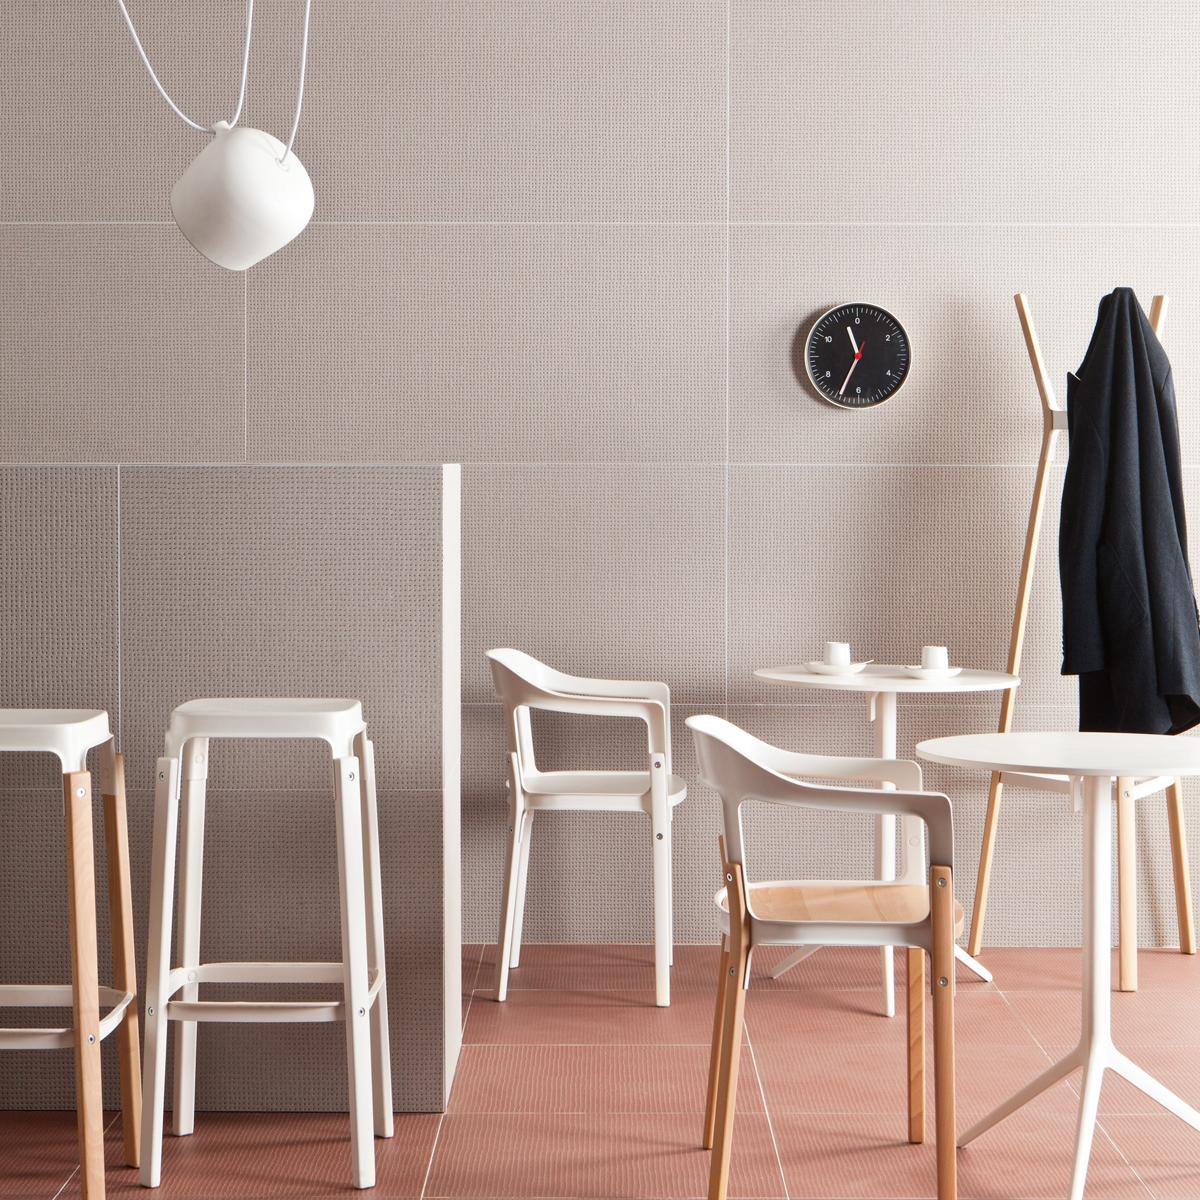 Bouroullec Modern White Plug-In Hanging Aim Pendant Light for FLOS, in stock 2